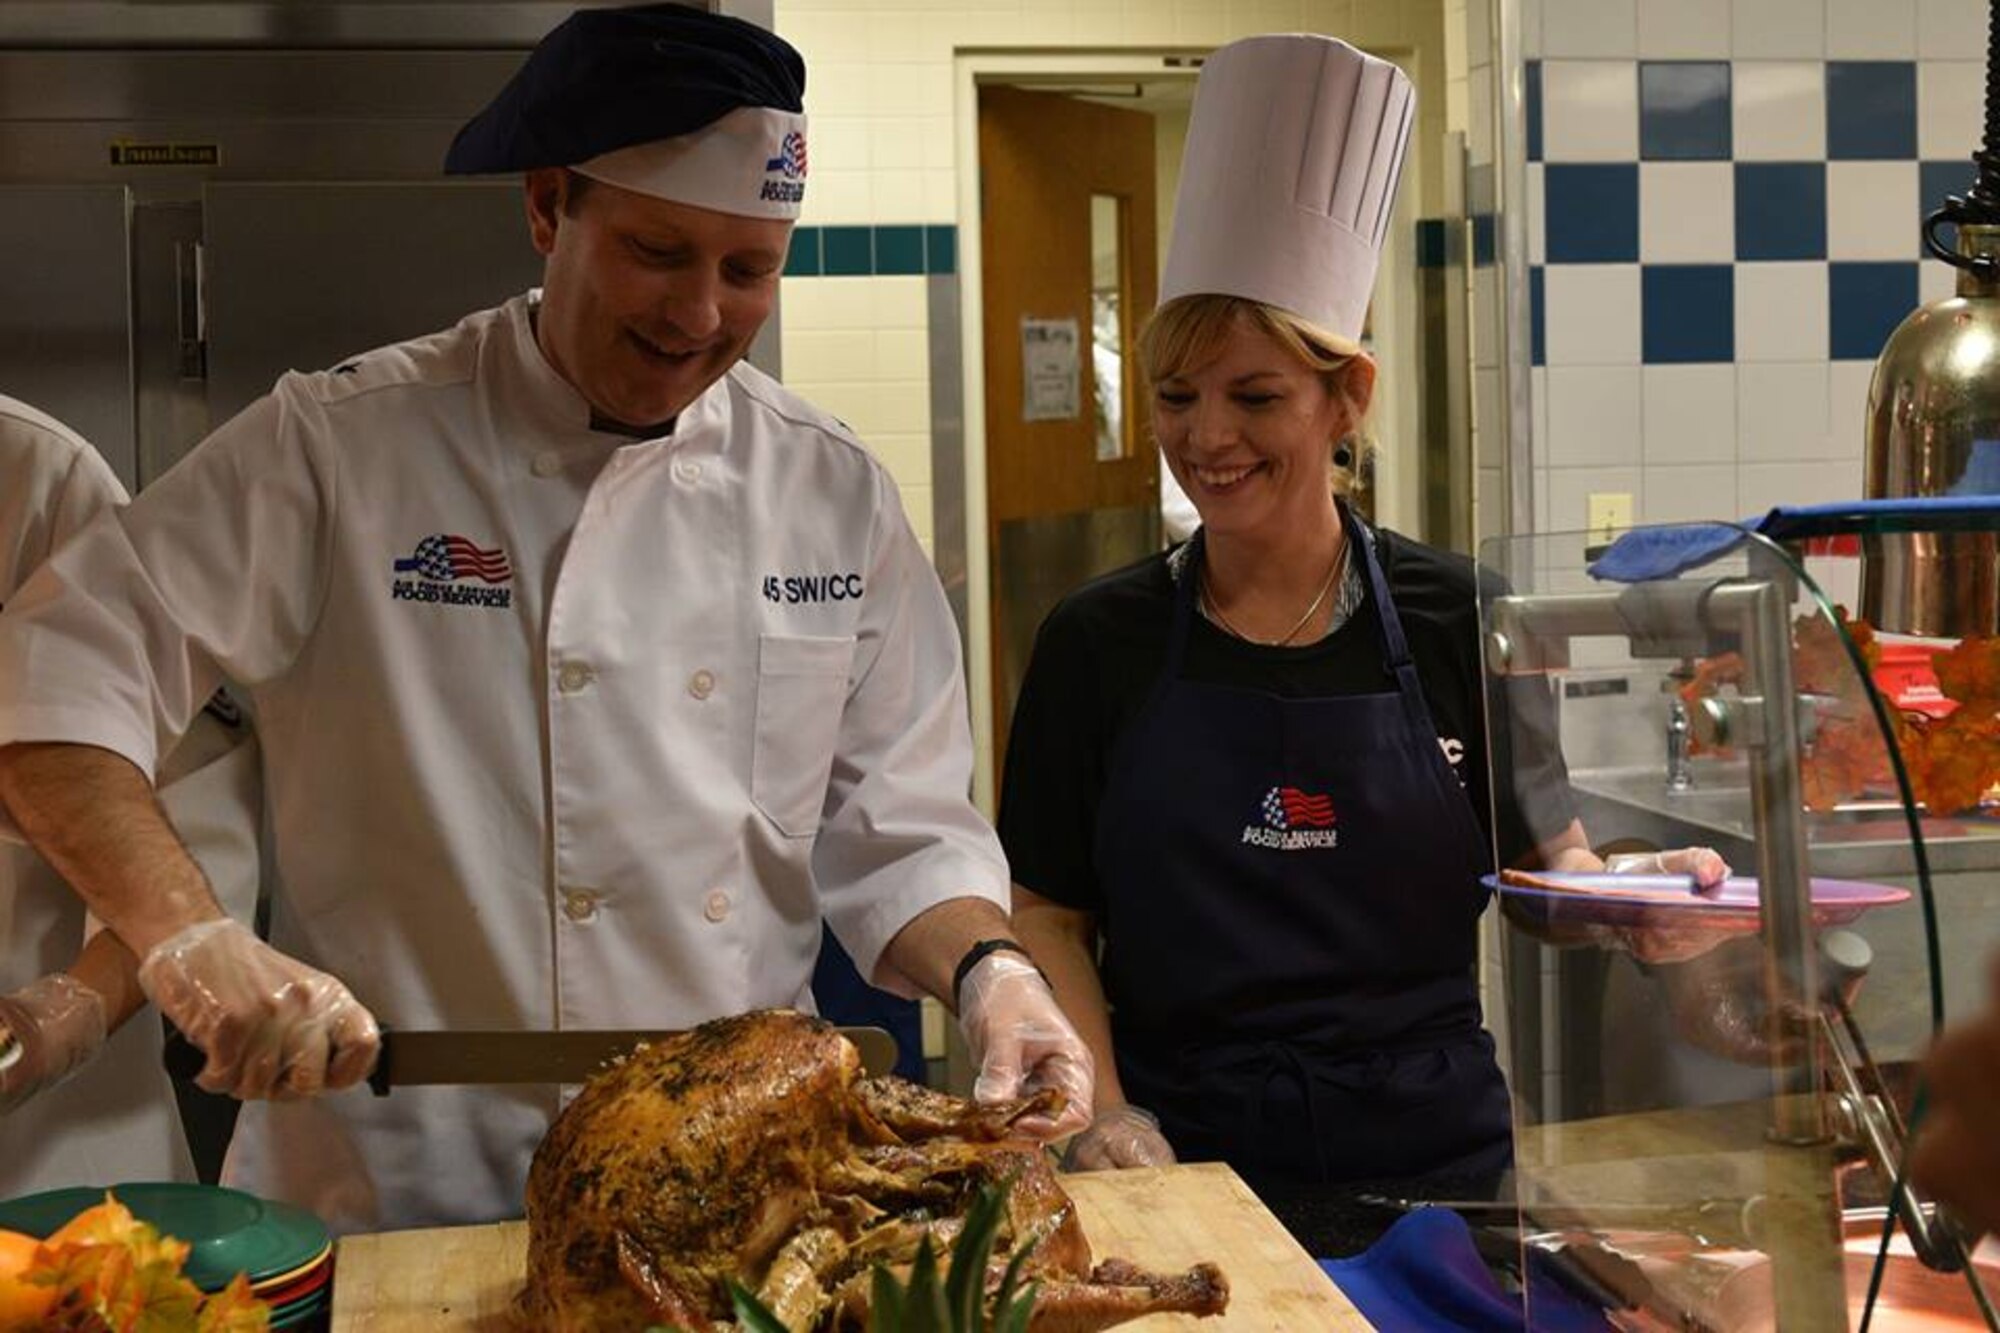 Brig. Gen. Doug Schiess, 45th Space Wing commander, and his wife Debbie, volunteer to feed the base community at the Patrick Air Force Base Riverside Dining Facility, on Nov. 22, 2018. Airmen live by their core values, and the 45th SW leadership demonstrated Air Force core values by serving our community meals during the Thanksgiving holiday.